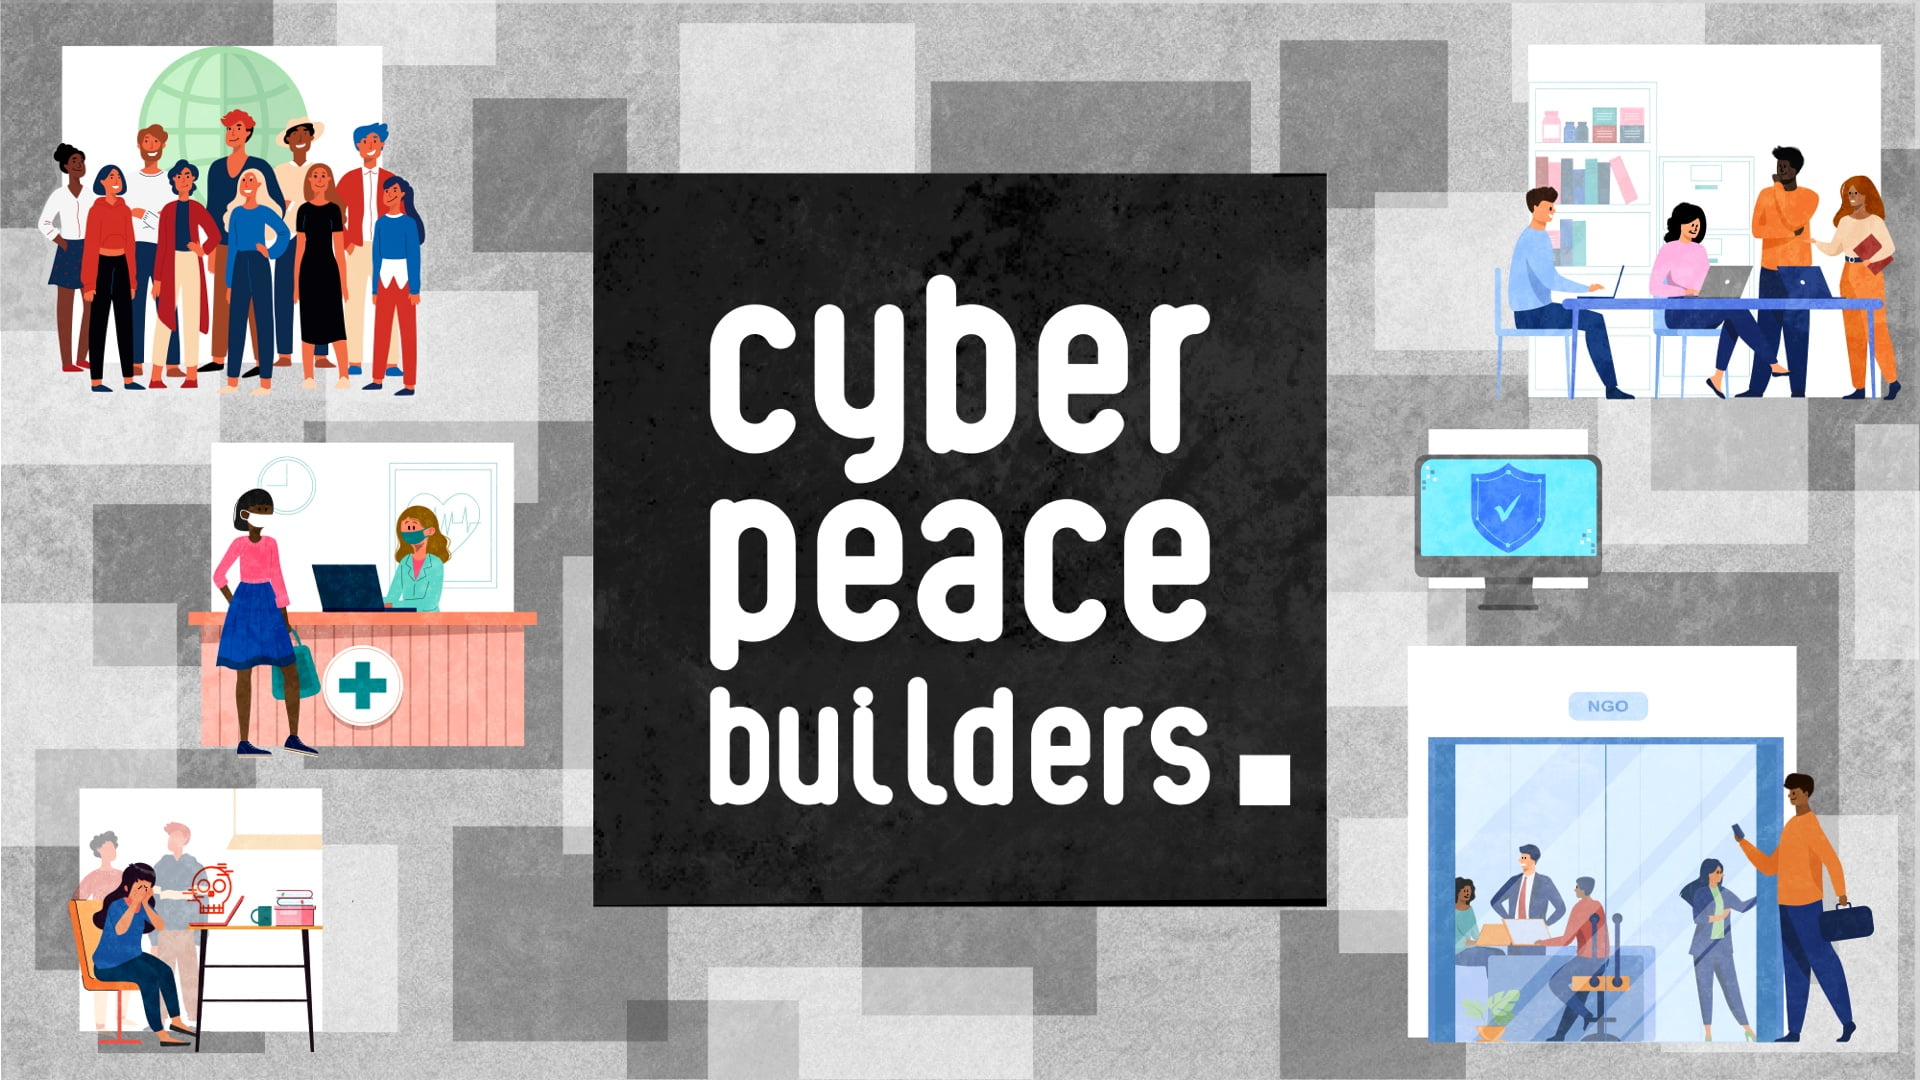 A new generation of peacebuilders is born: welcome to the CyberPeace Builders